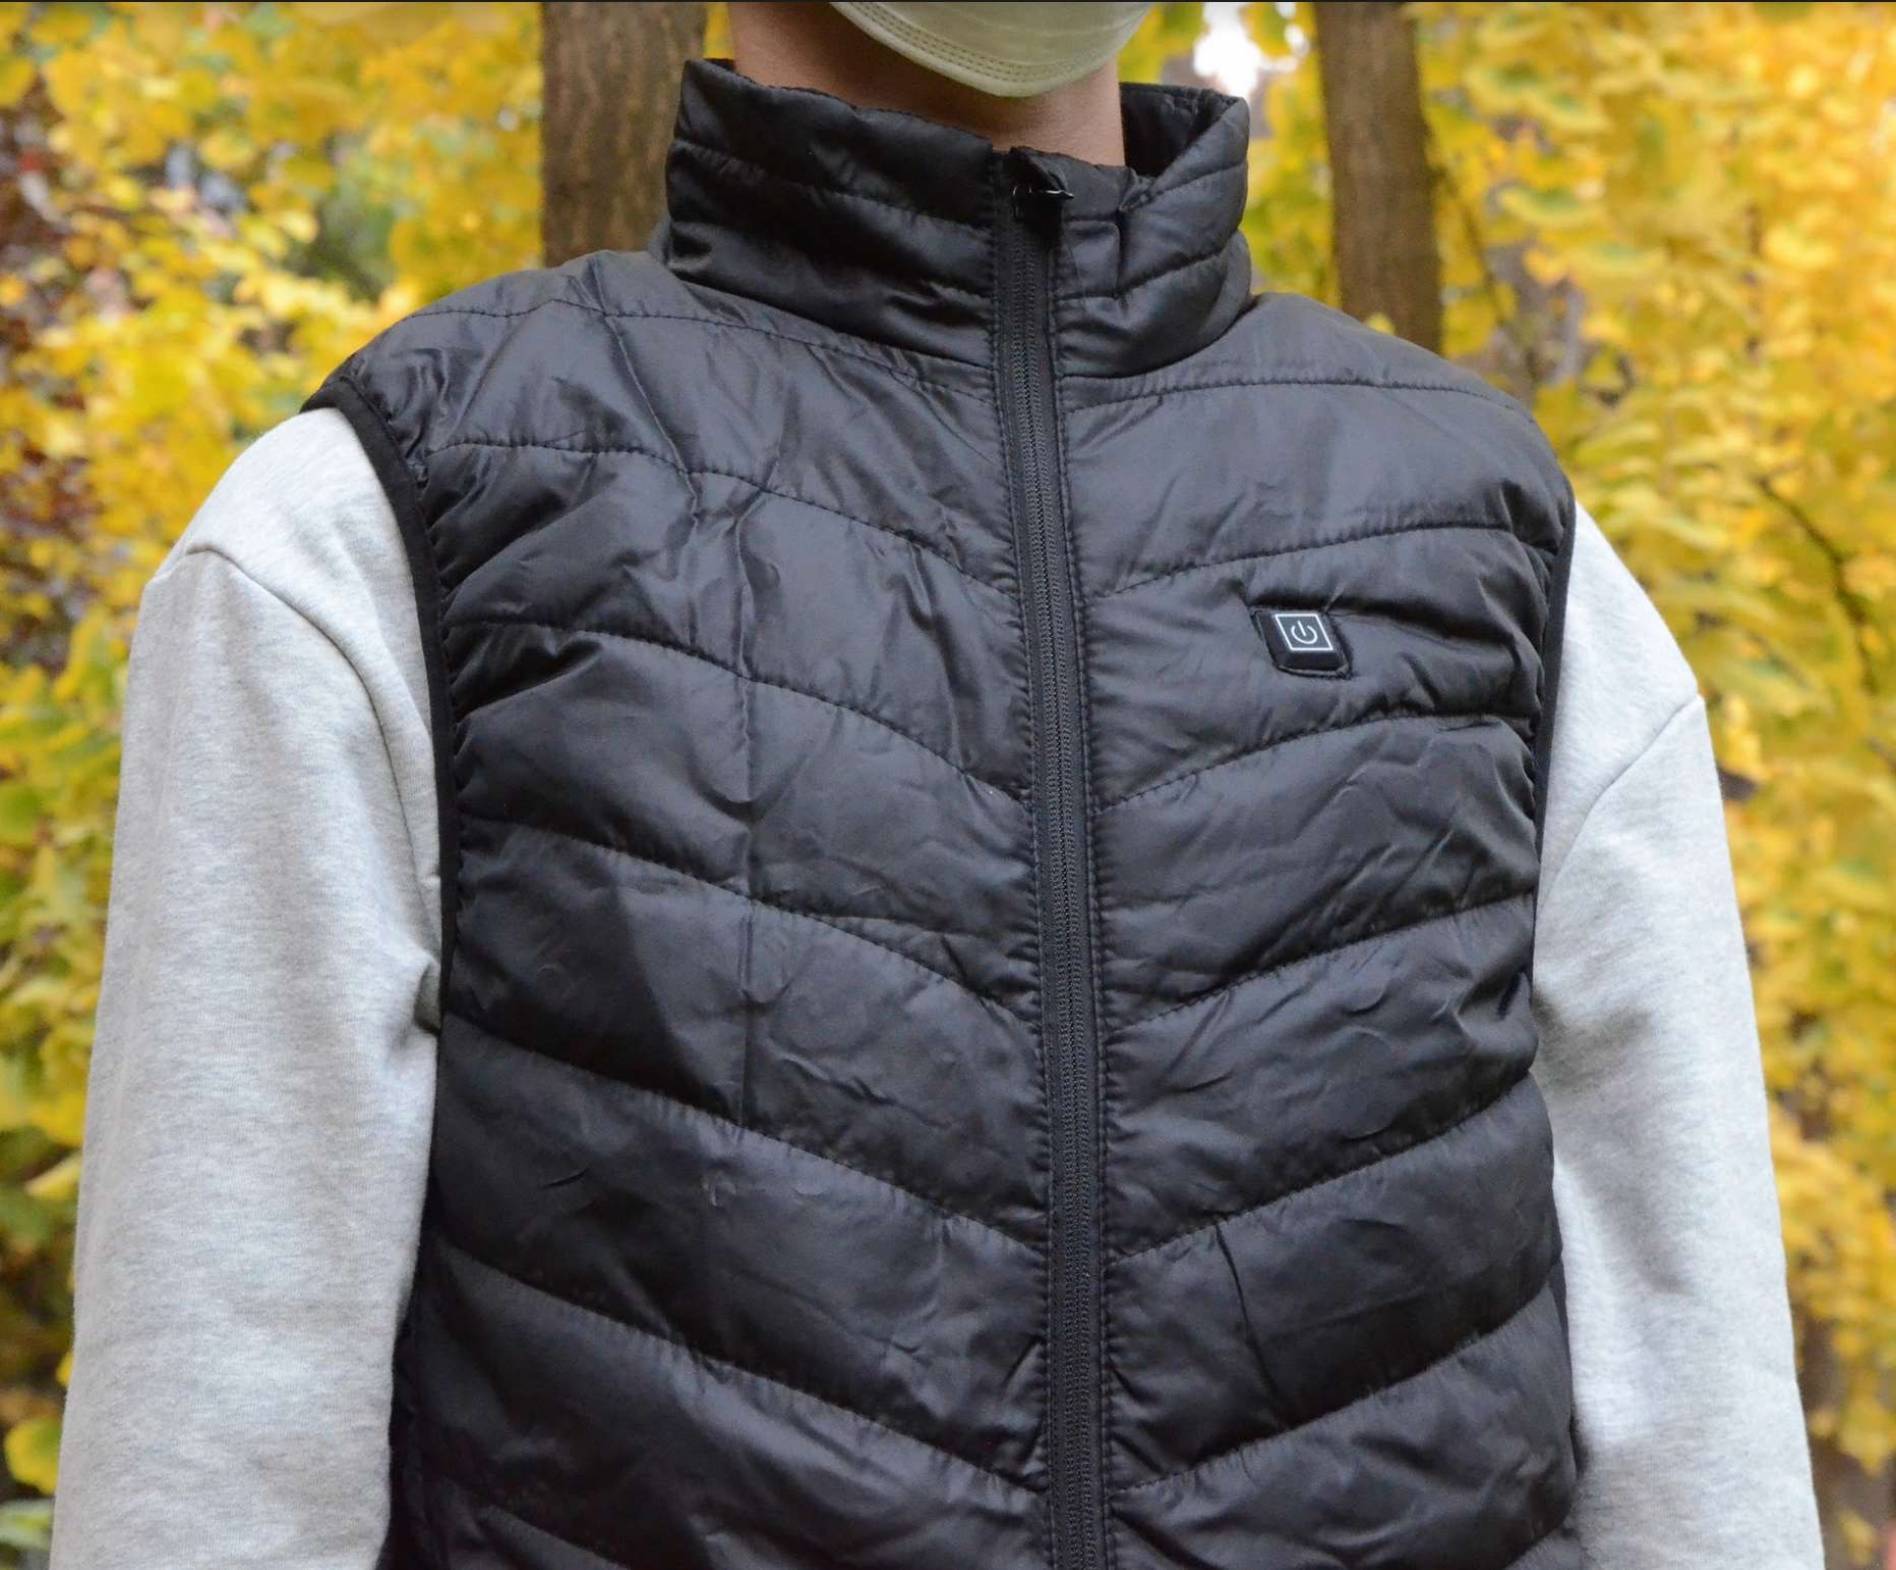 Which Heated Vest Is The Best